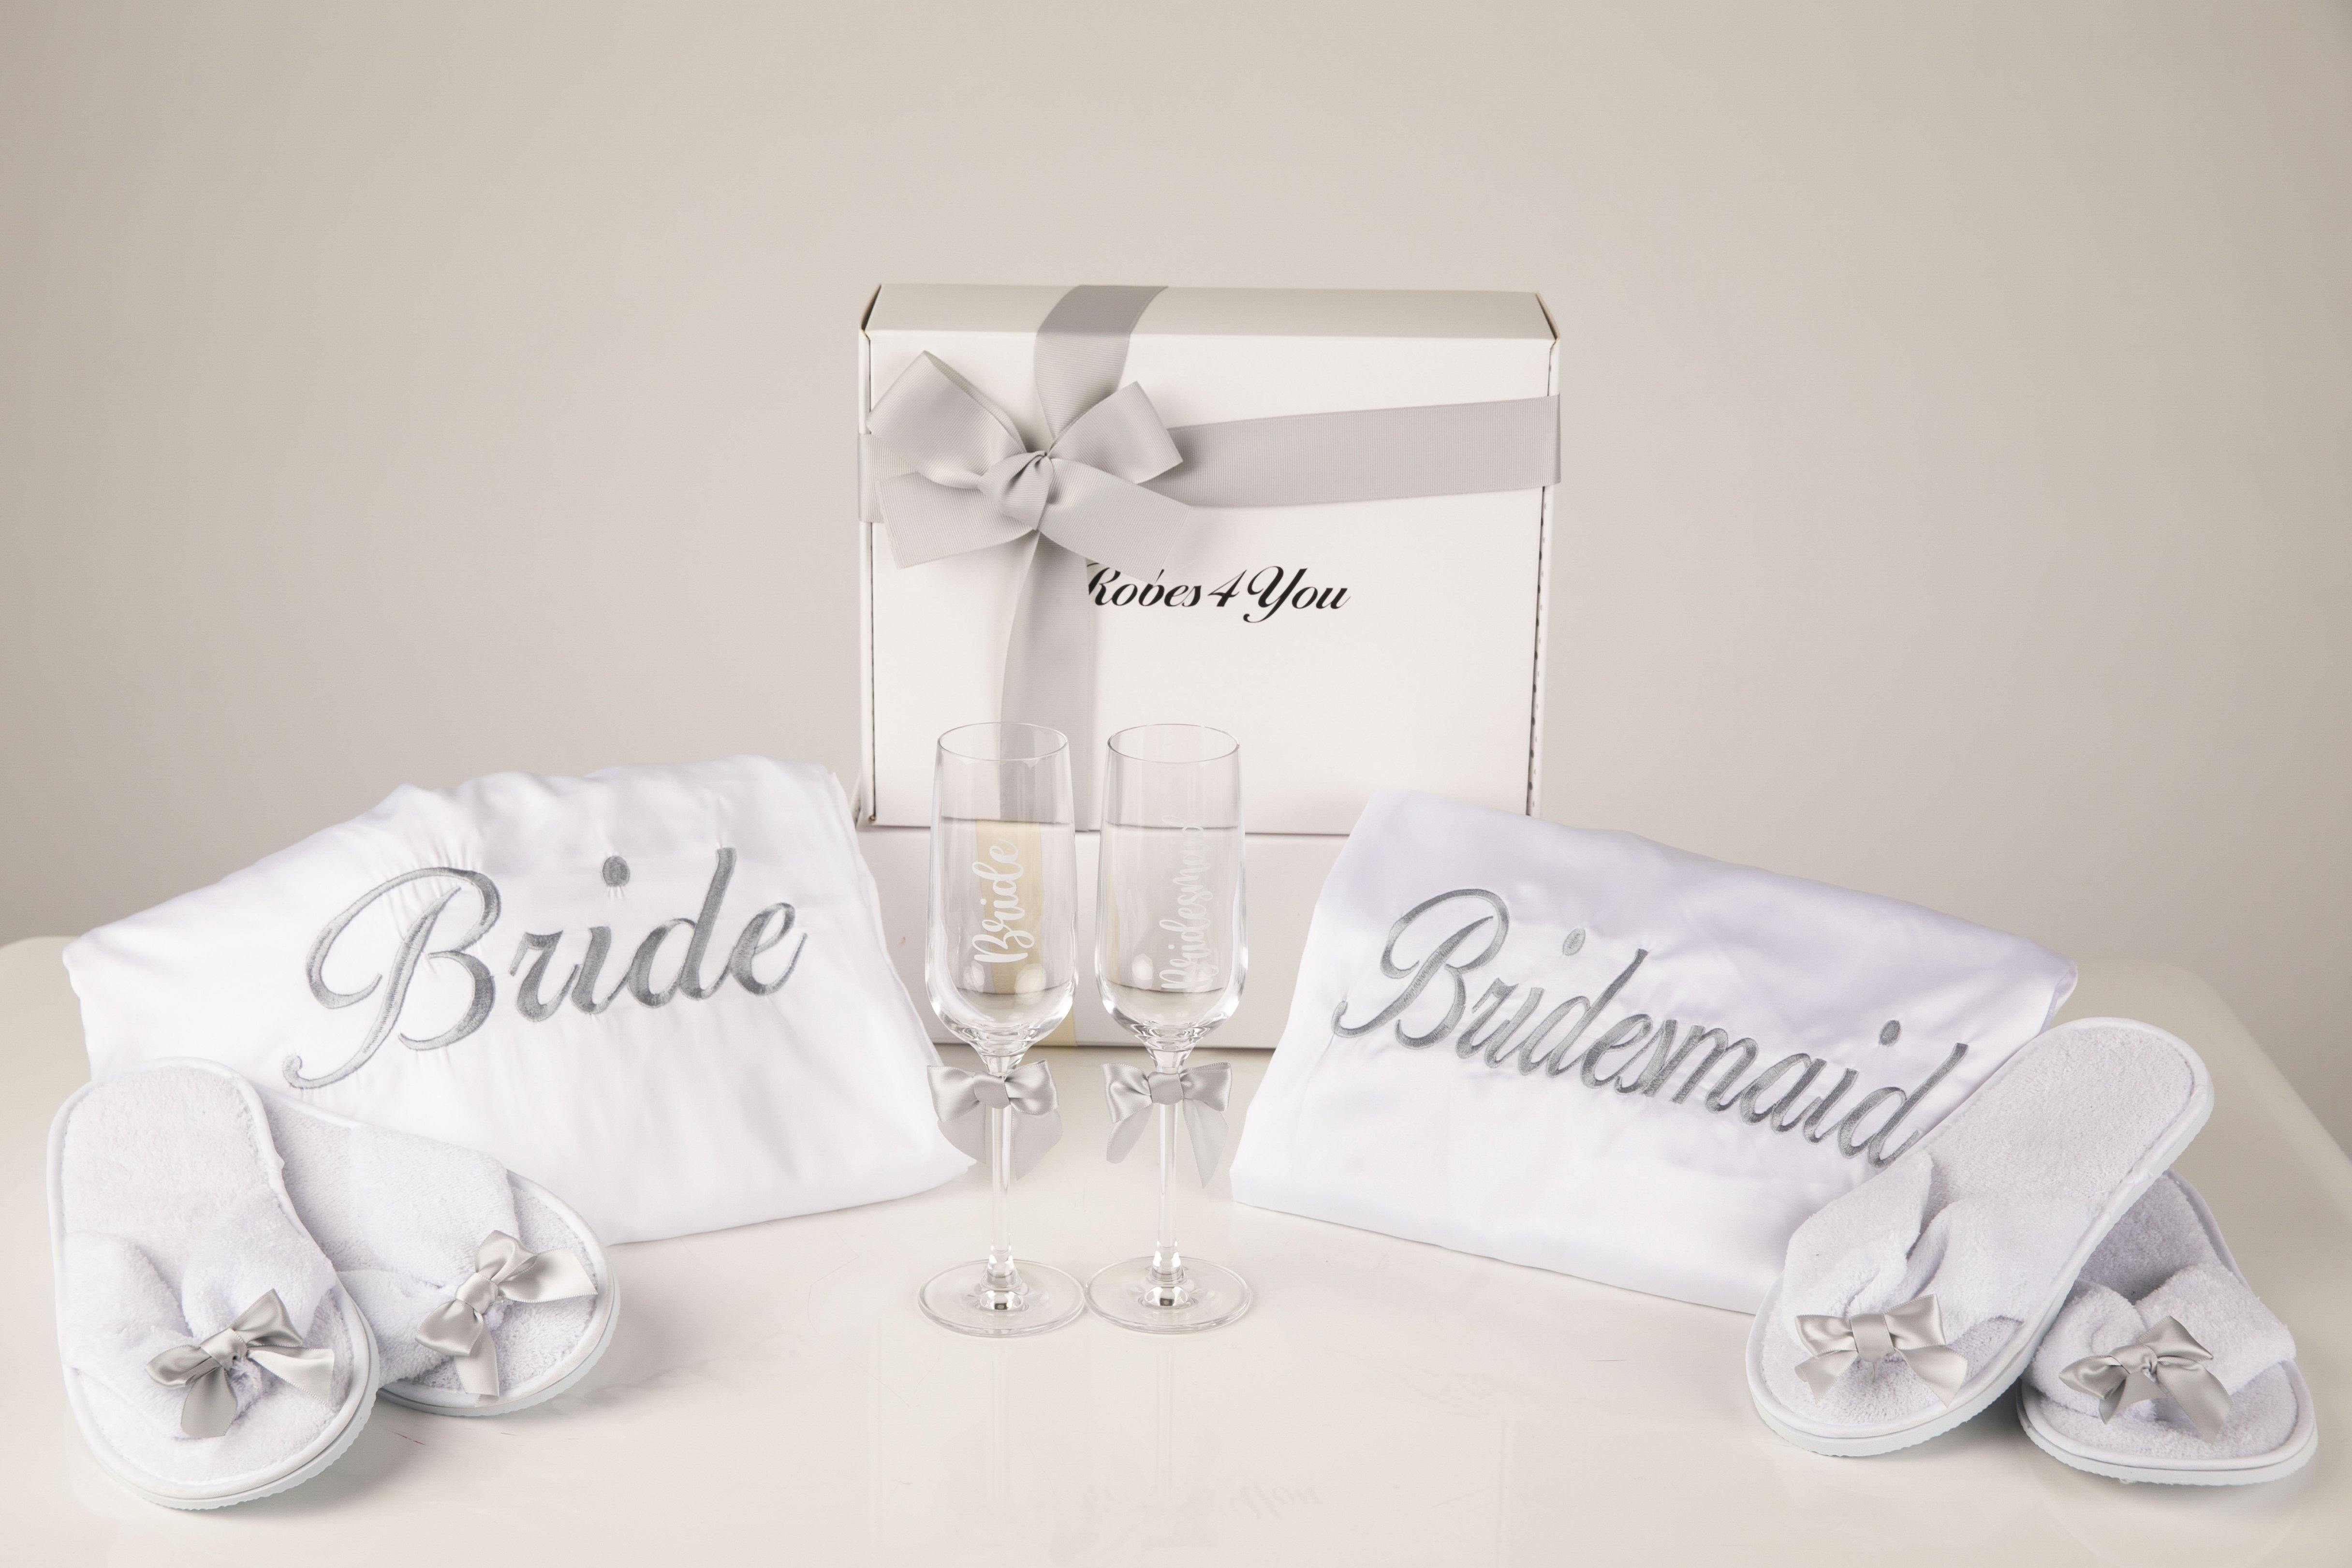 Personalised white satin wedding robes-Robes4you